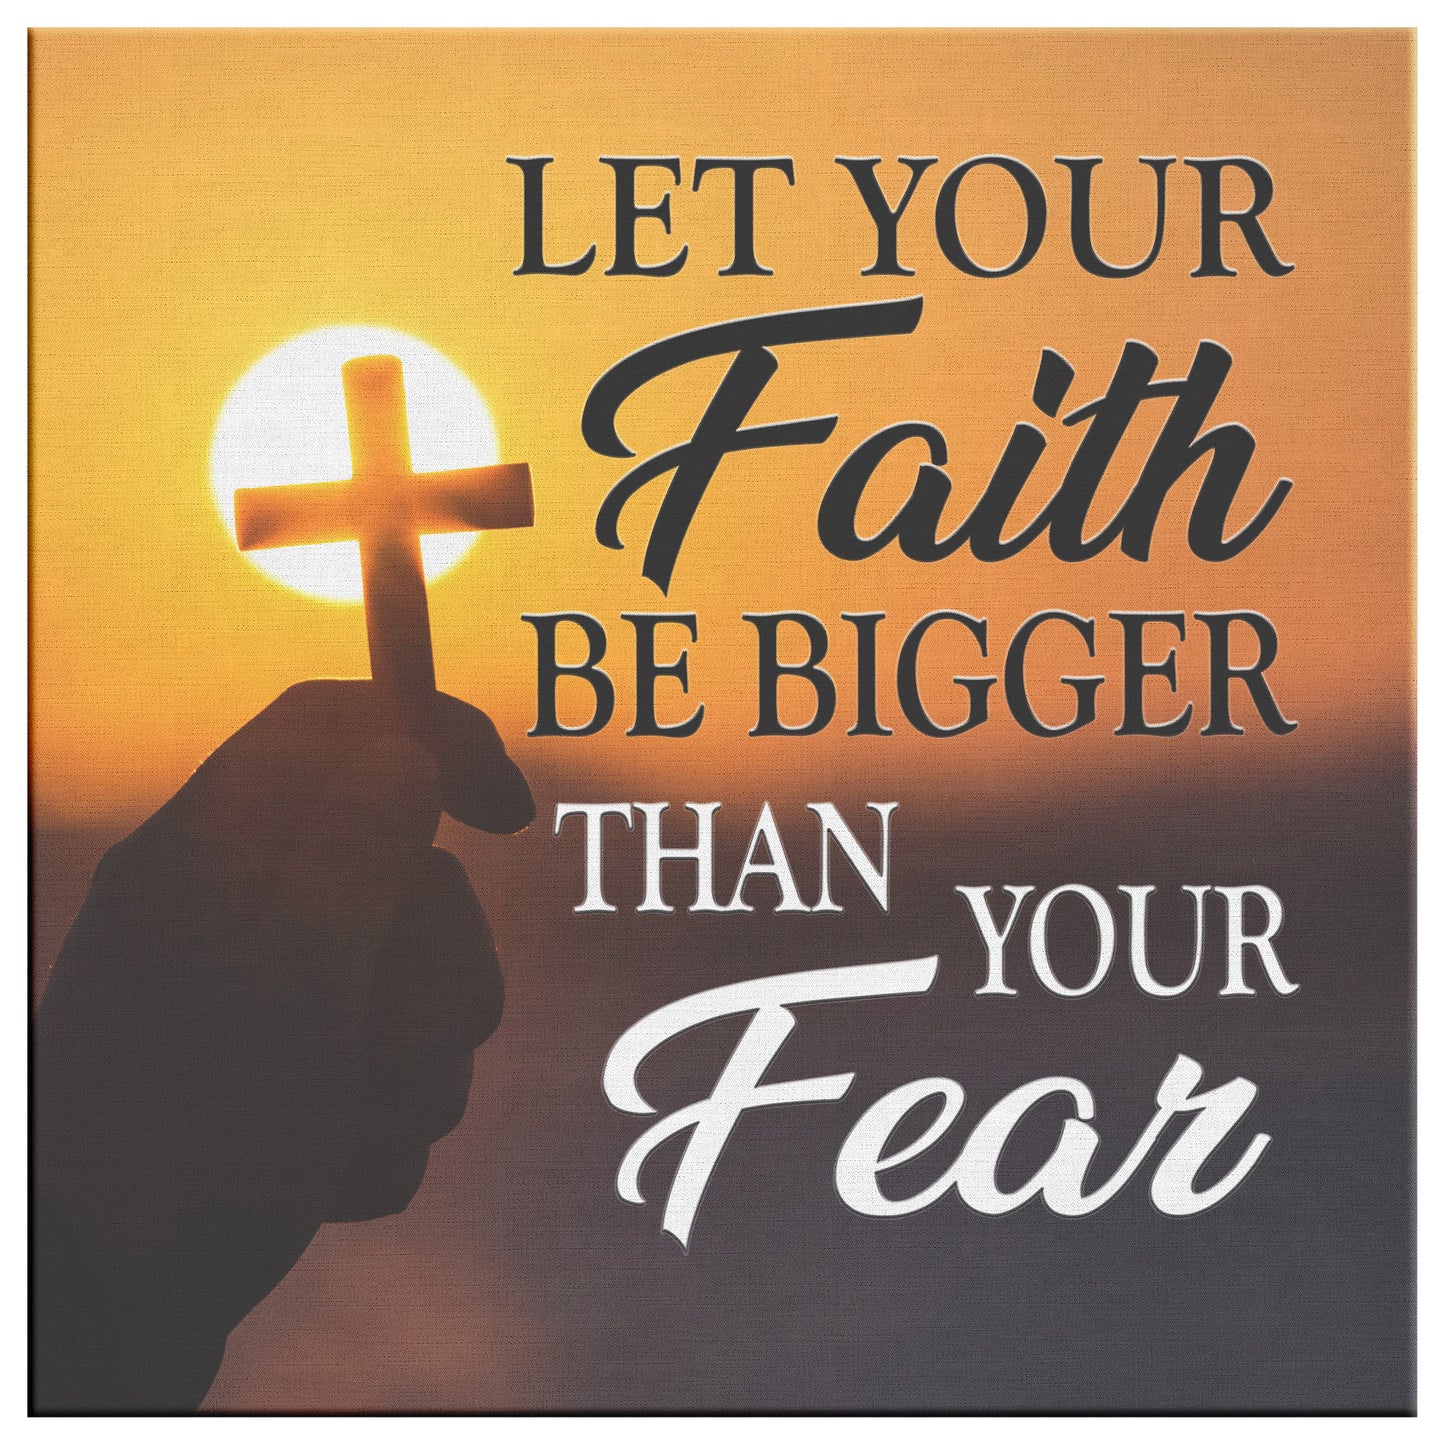 Let Your Faith Be Bigger Than Your Fear Premium Square Canvas